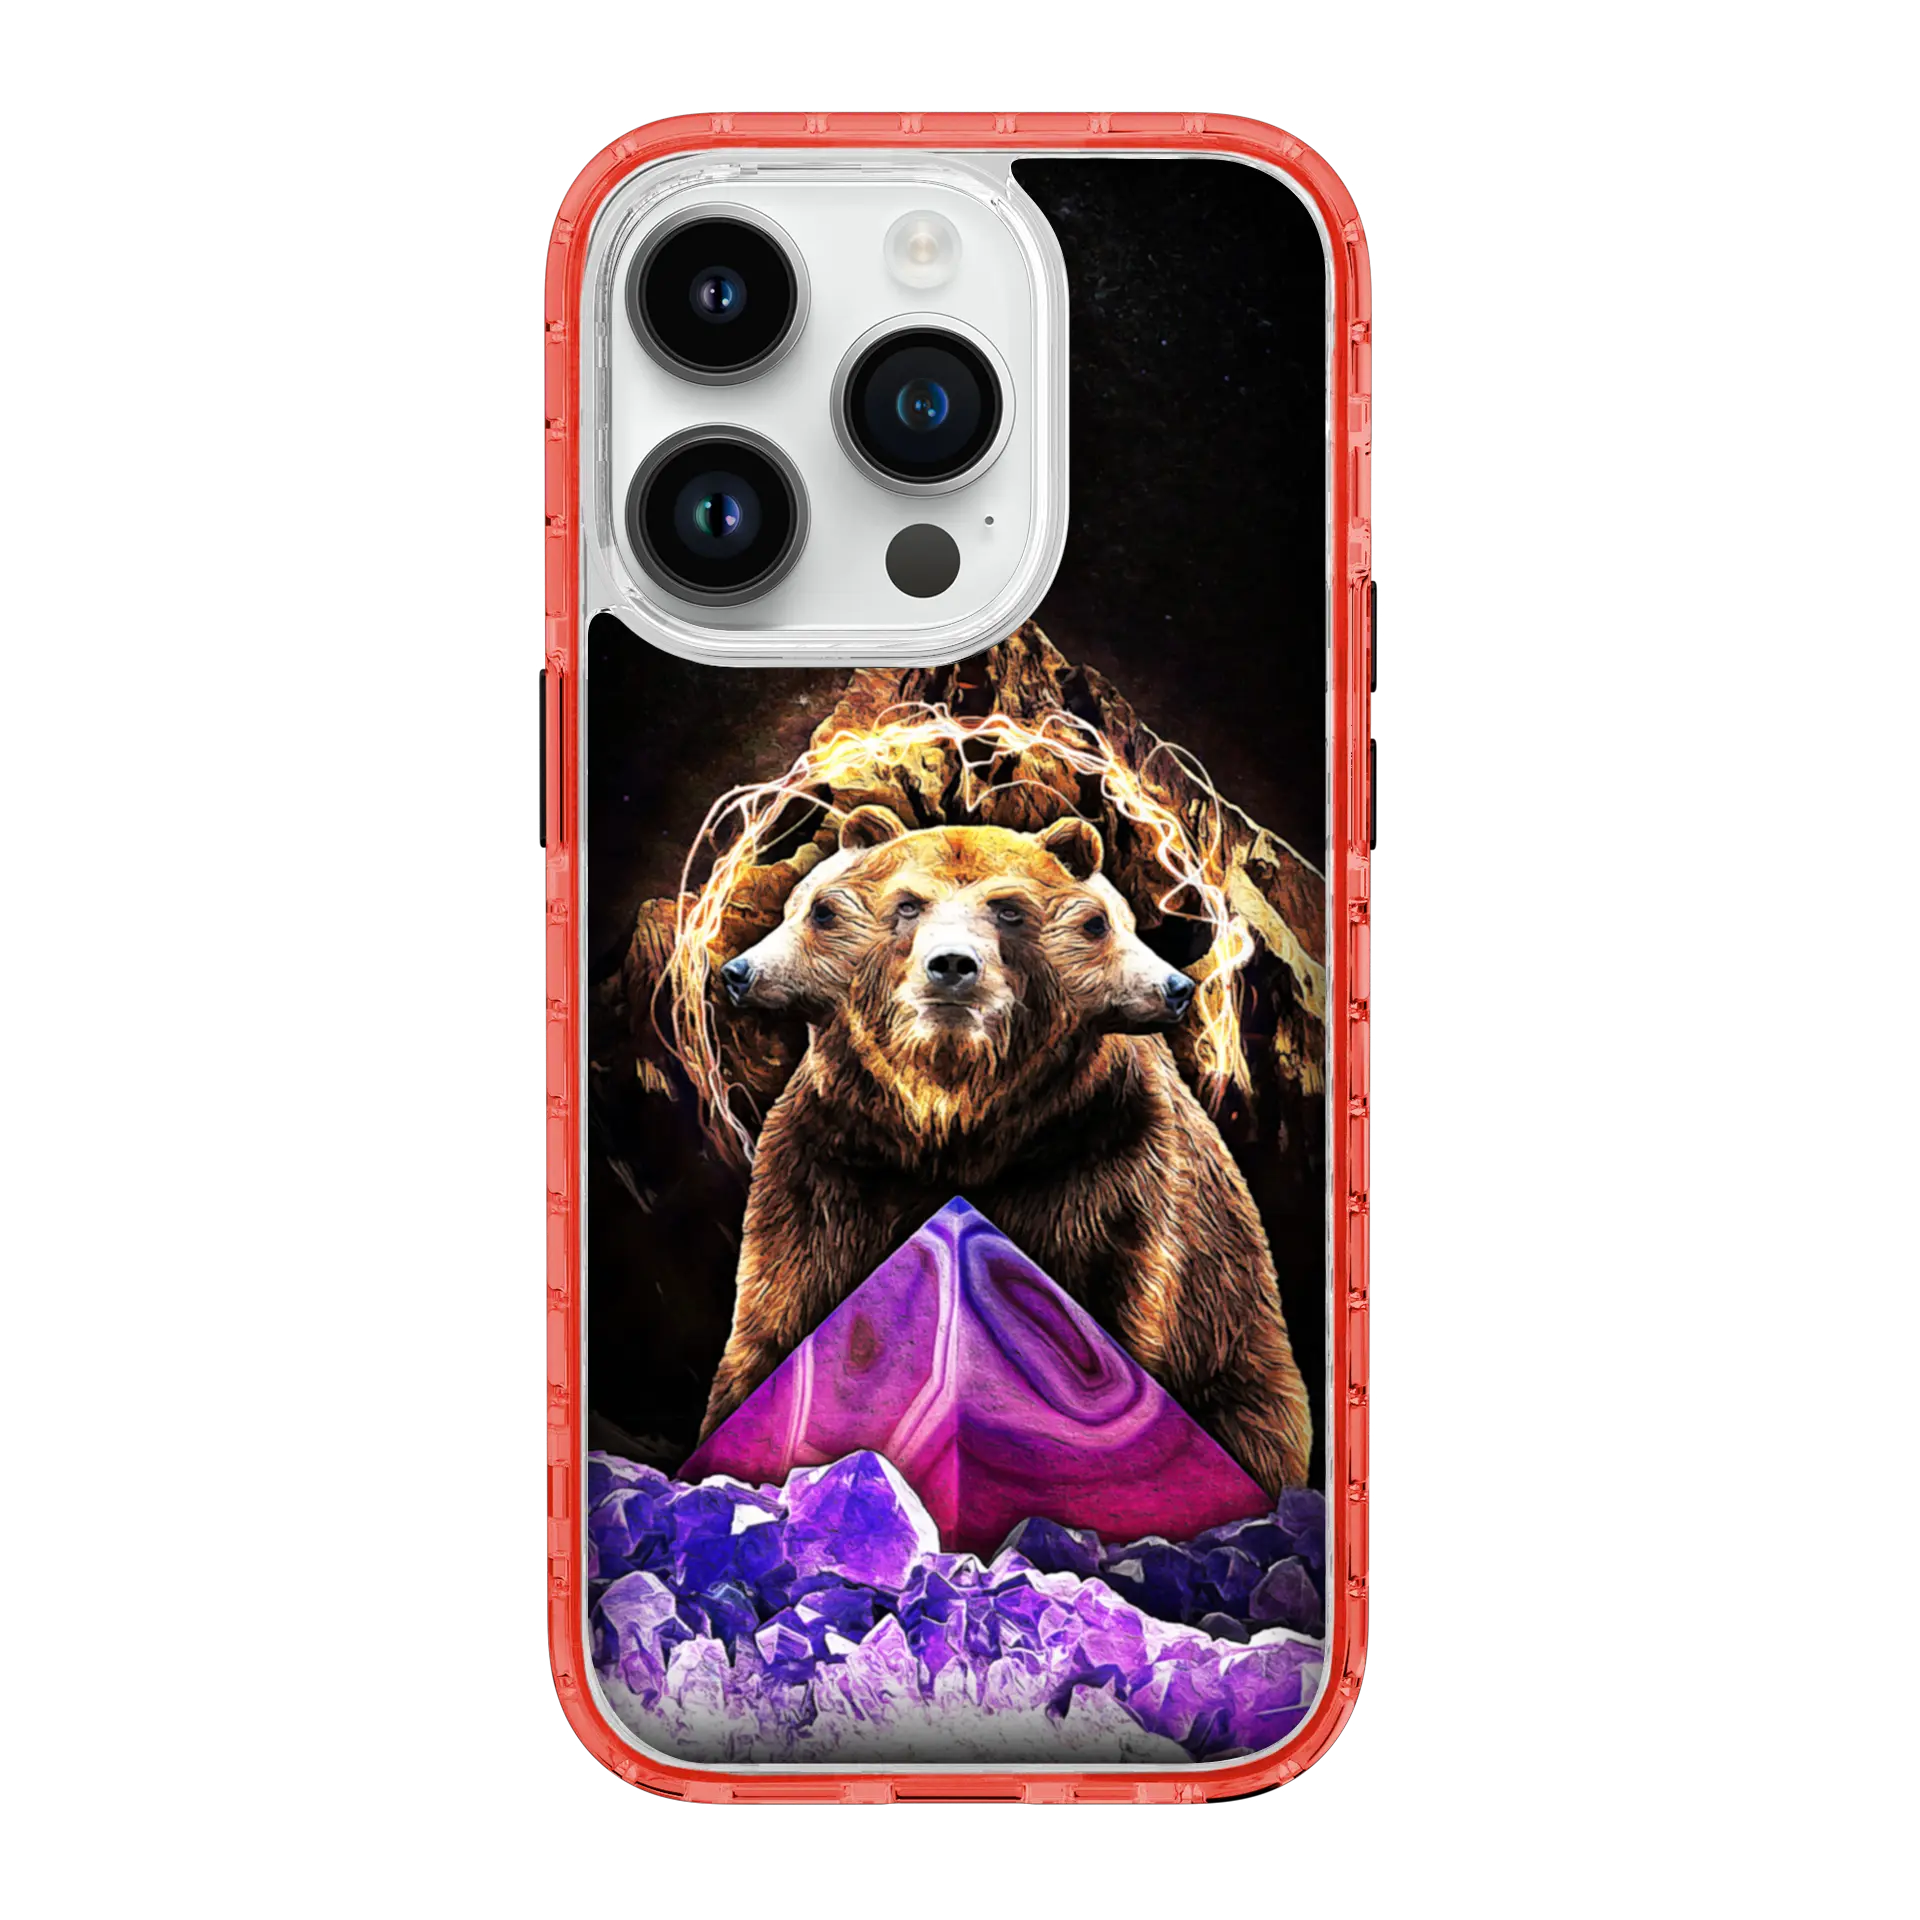 AppleiPhone14ProTurboRed Grizzly Widsom | Wizards & Wyrms Series | Custom MagSafe Case Design for Apple iPhone 14 Series cellhelmet cellhelmet